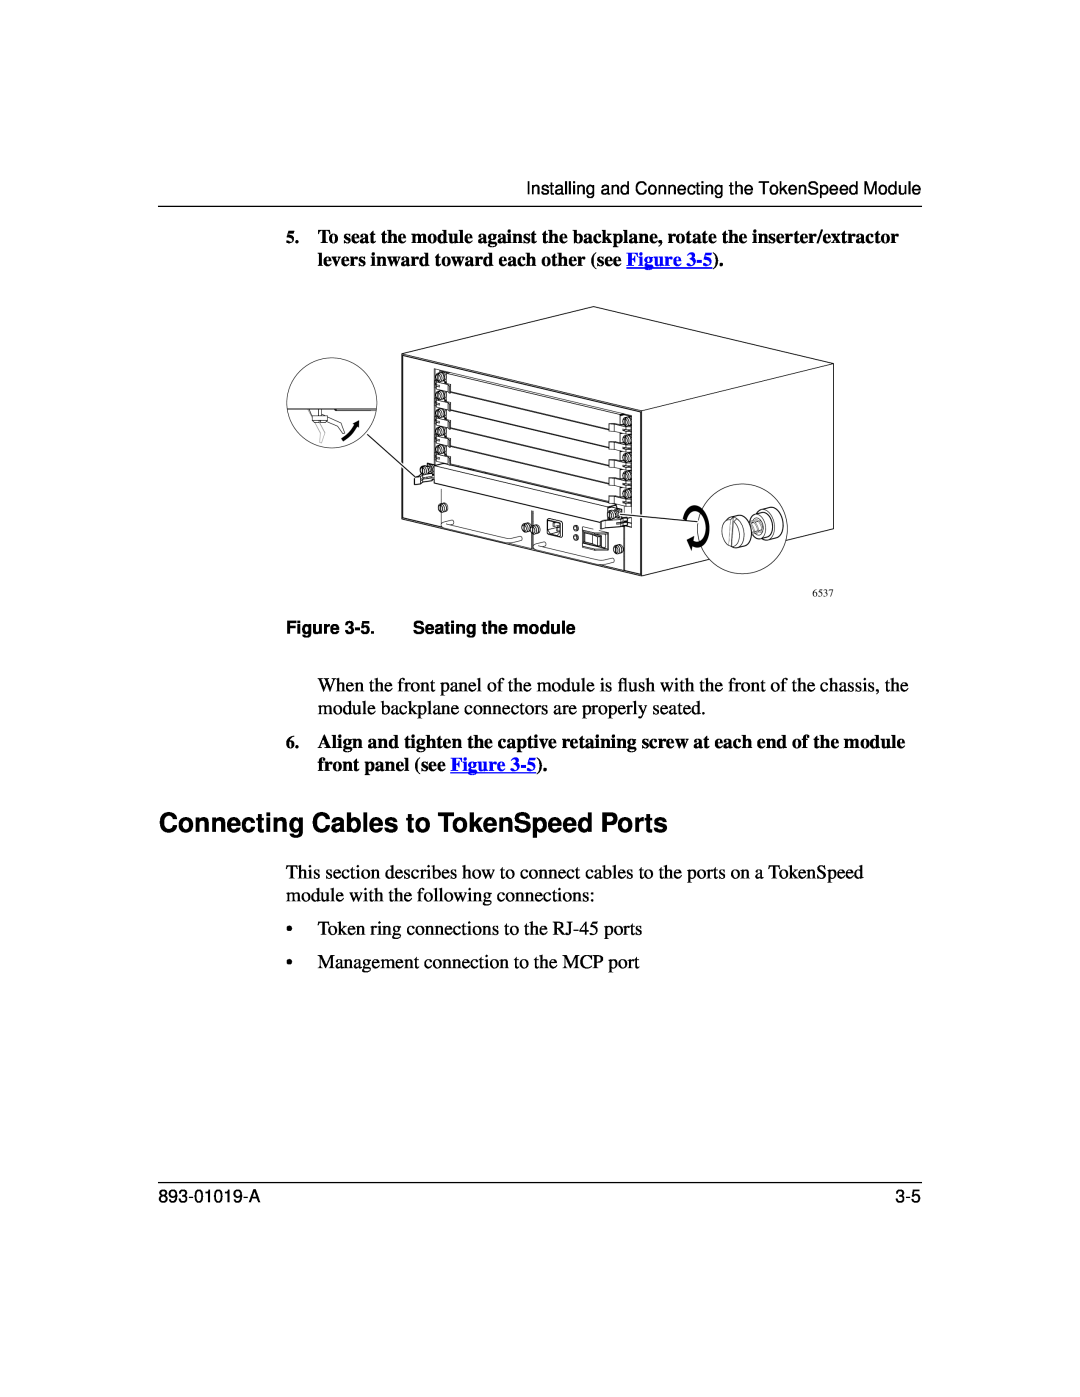 Nortel Networks 5000BH manual Connecting Cables to TokenSpeed Ports 